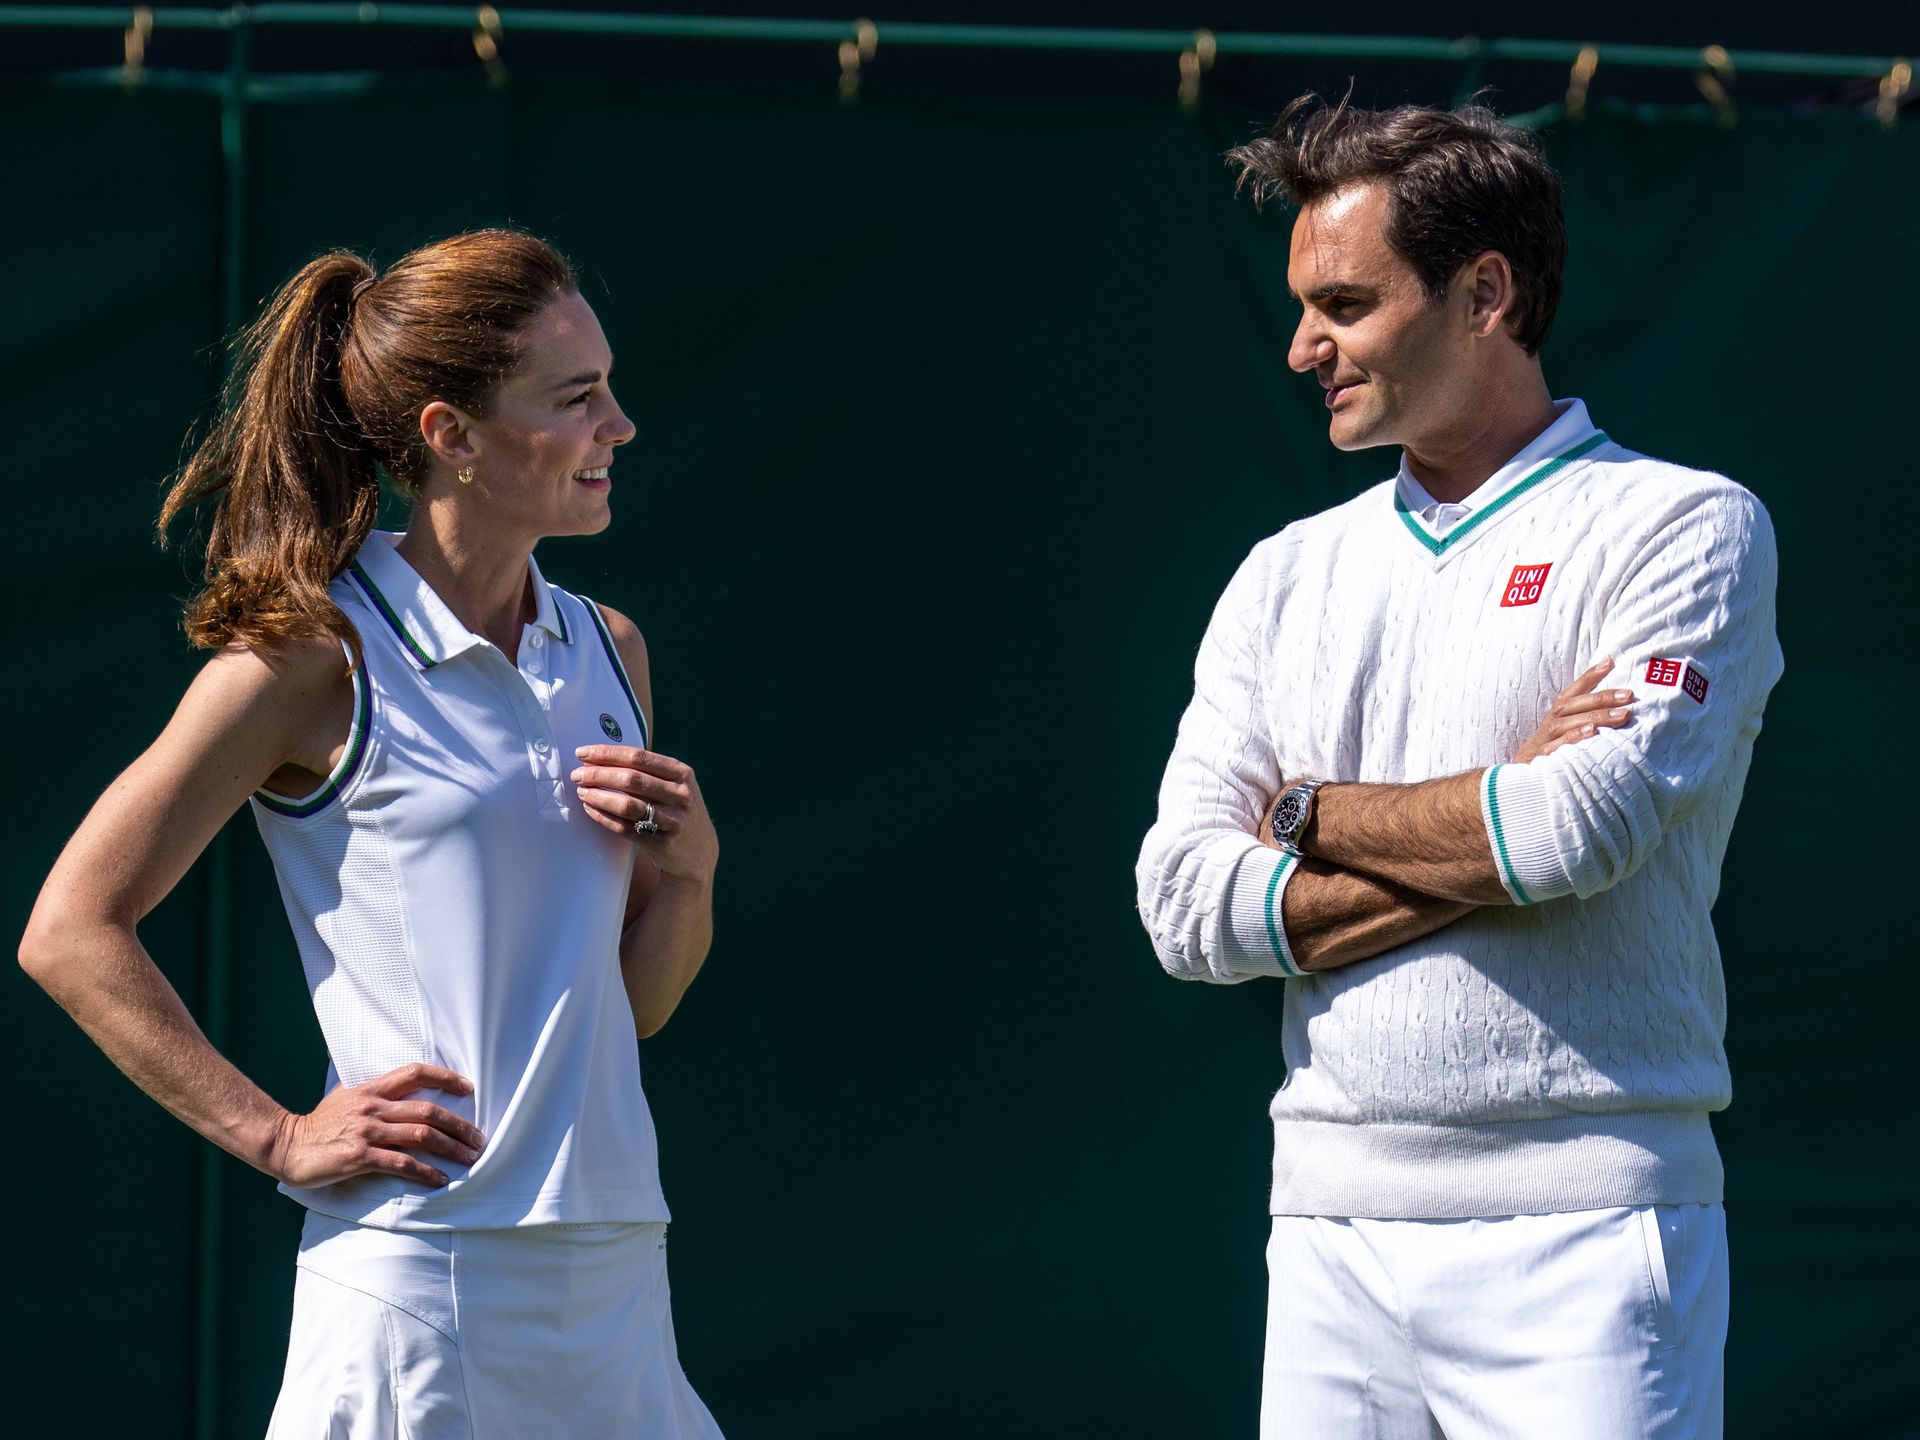 Princess Kate plays tennis with Roger Federer ahead of Wimbledon